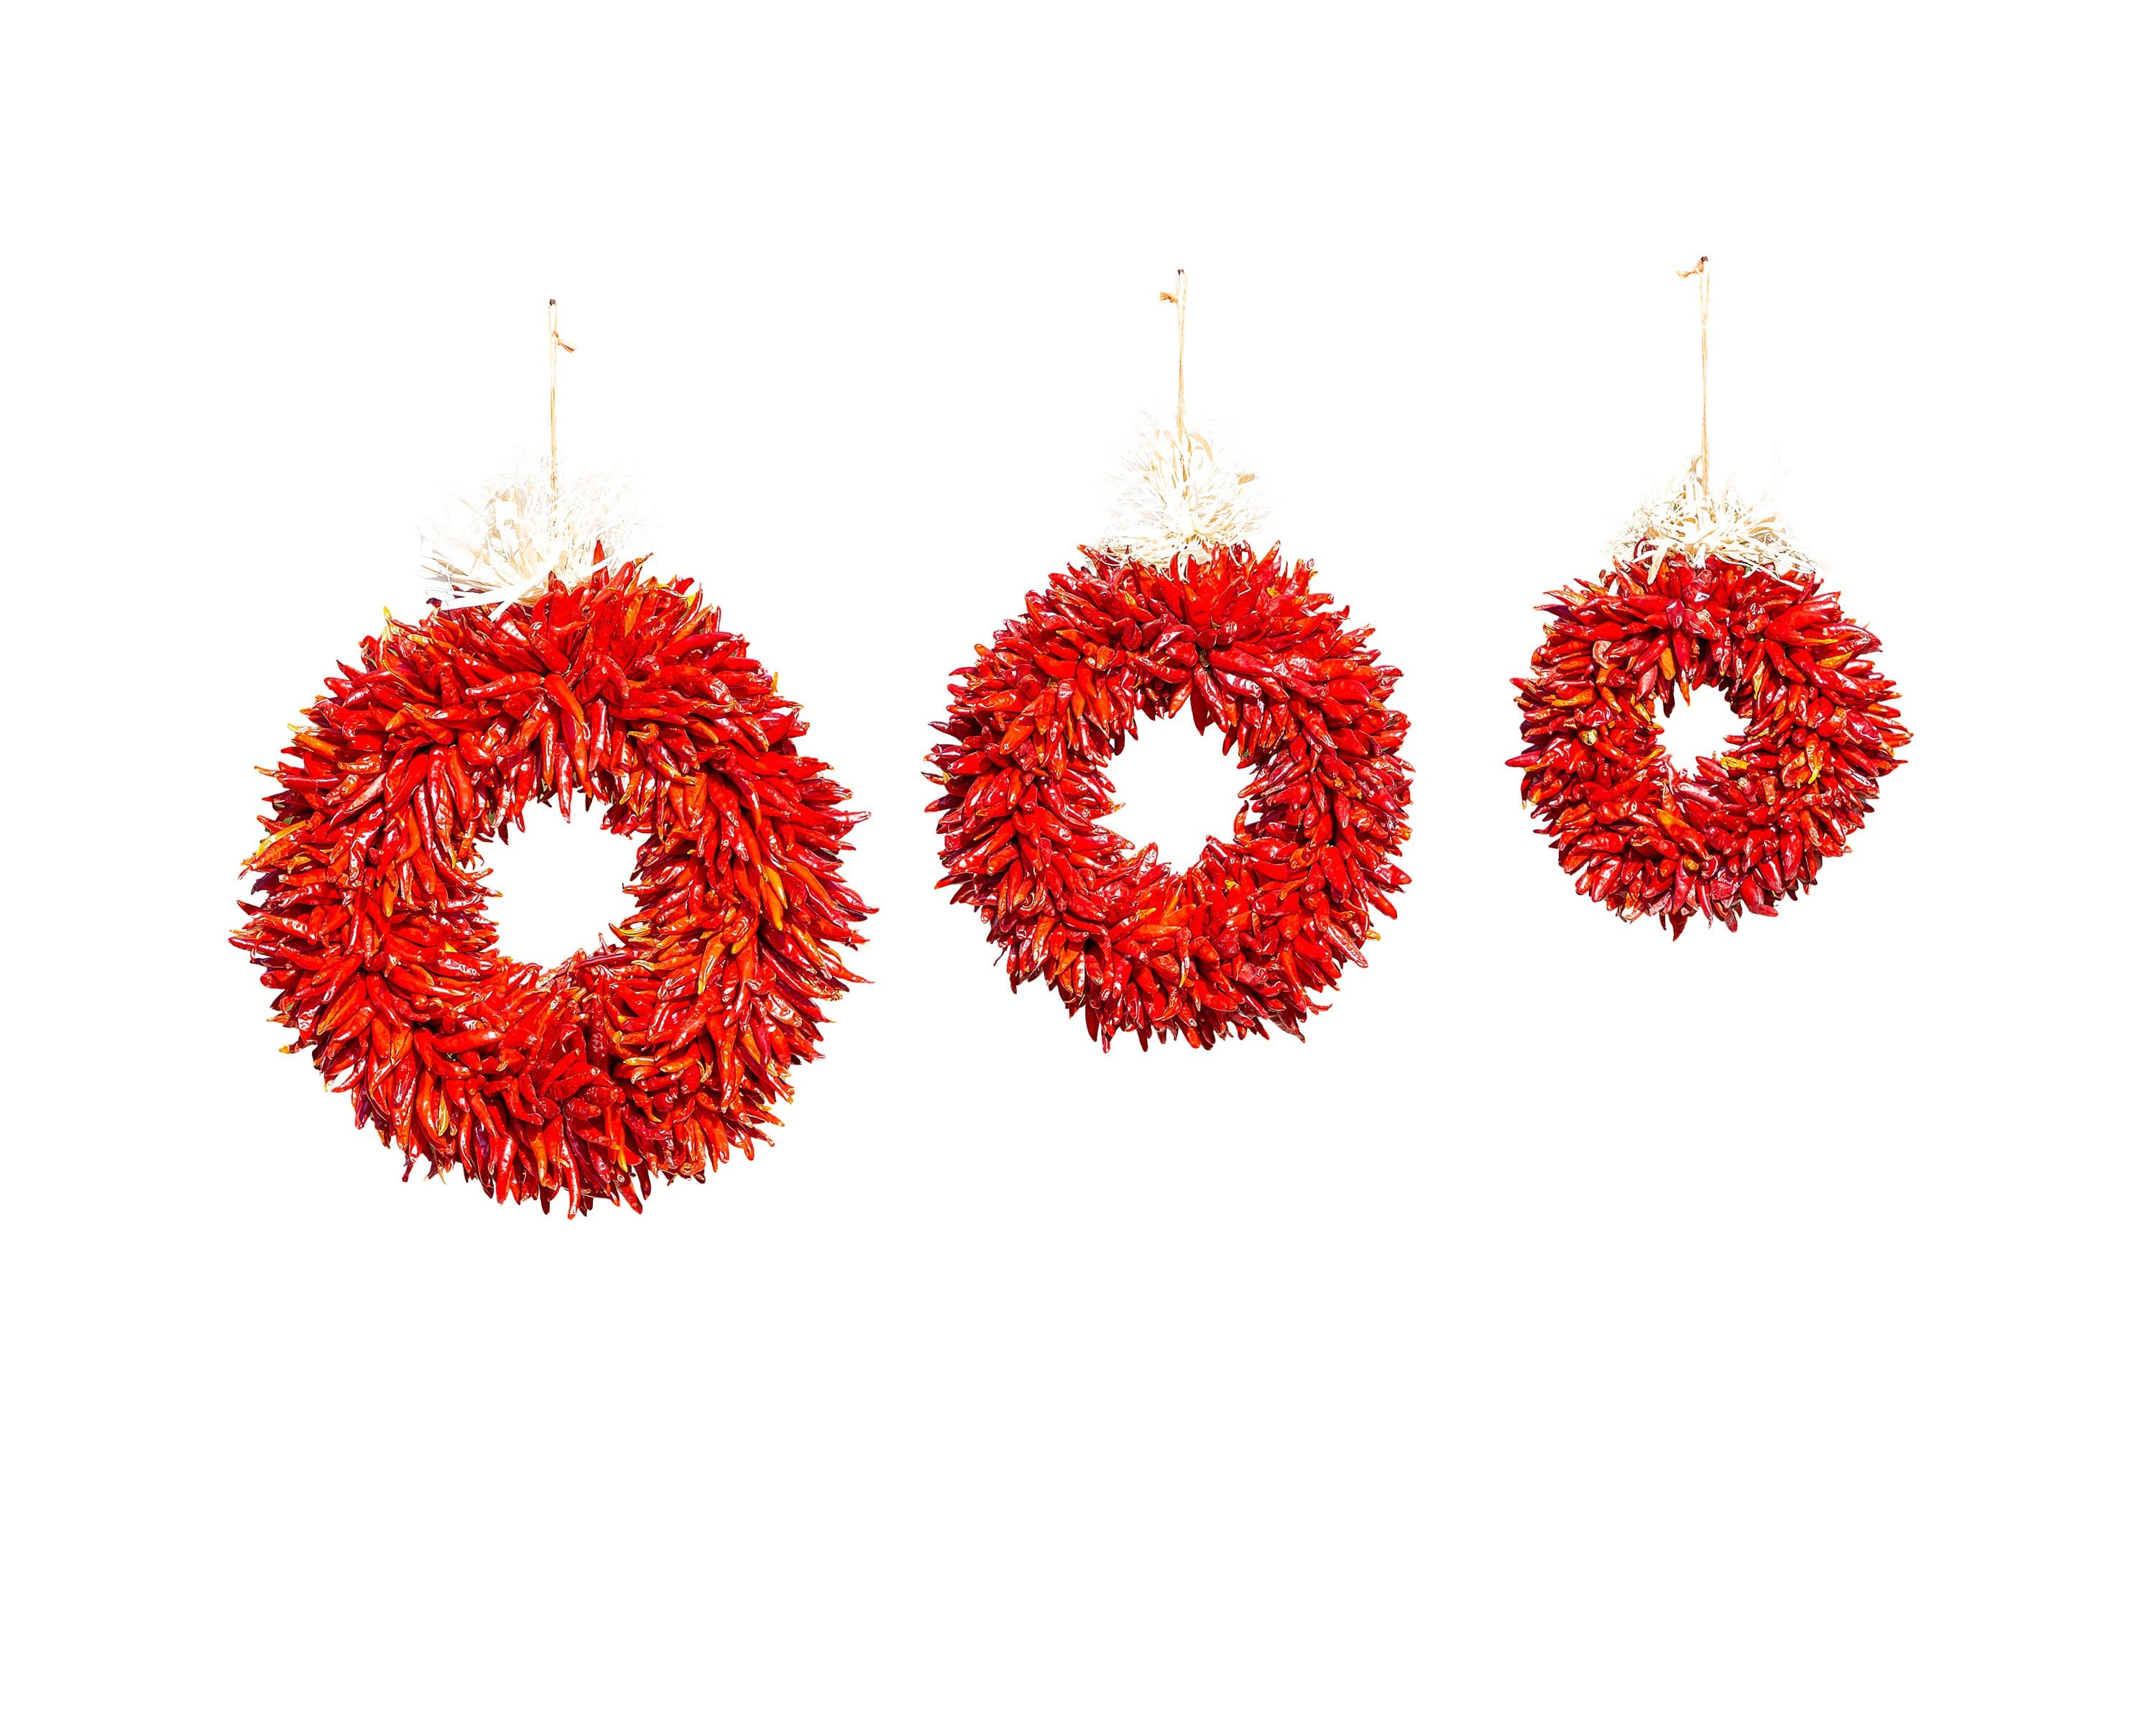 Three hand-made Chile Pequin Wreaths hanging against a white background, varying in size from large to small, arranged in a horizontal line.